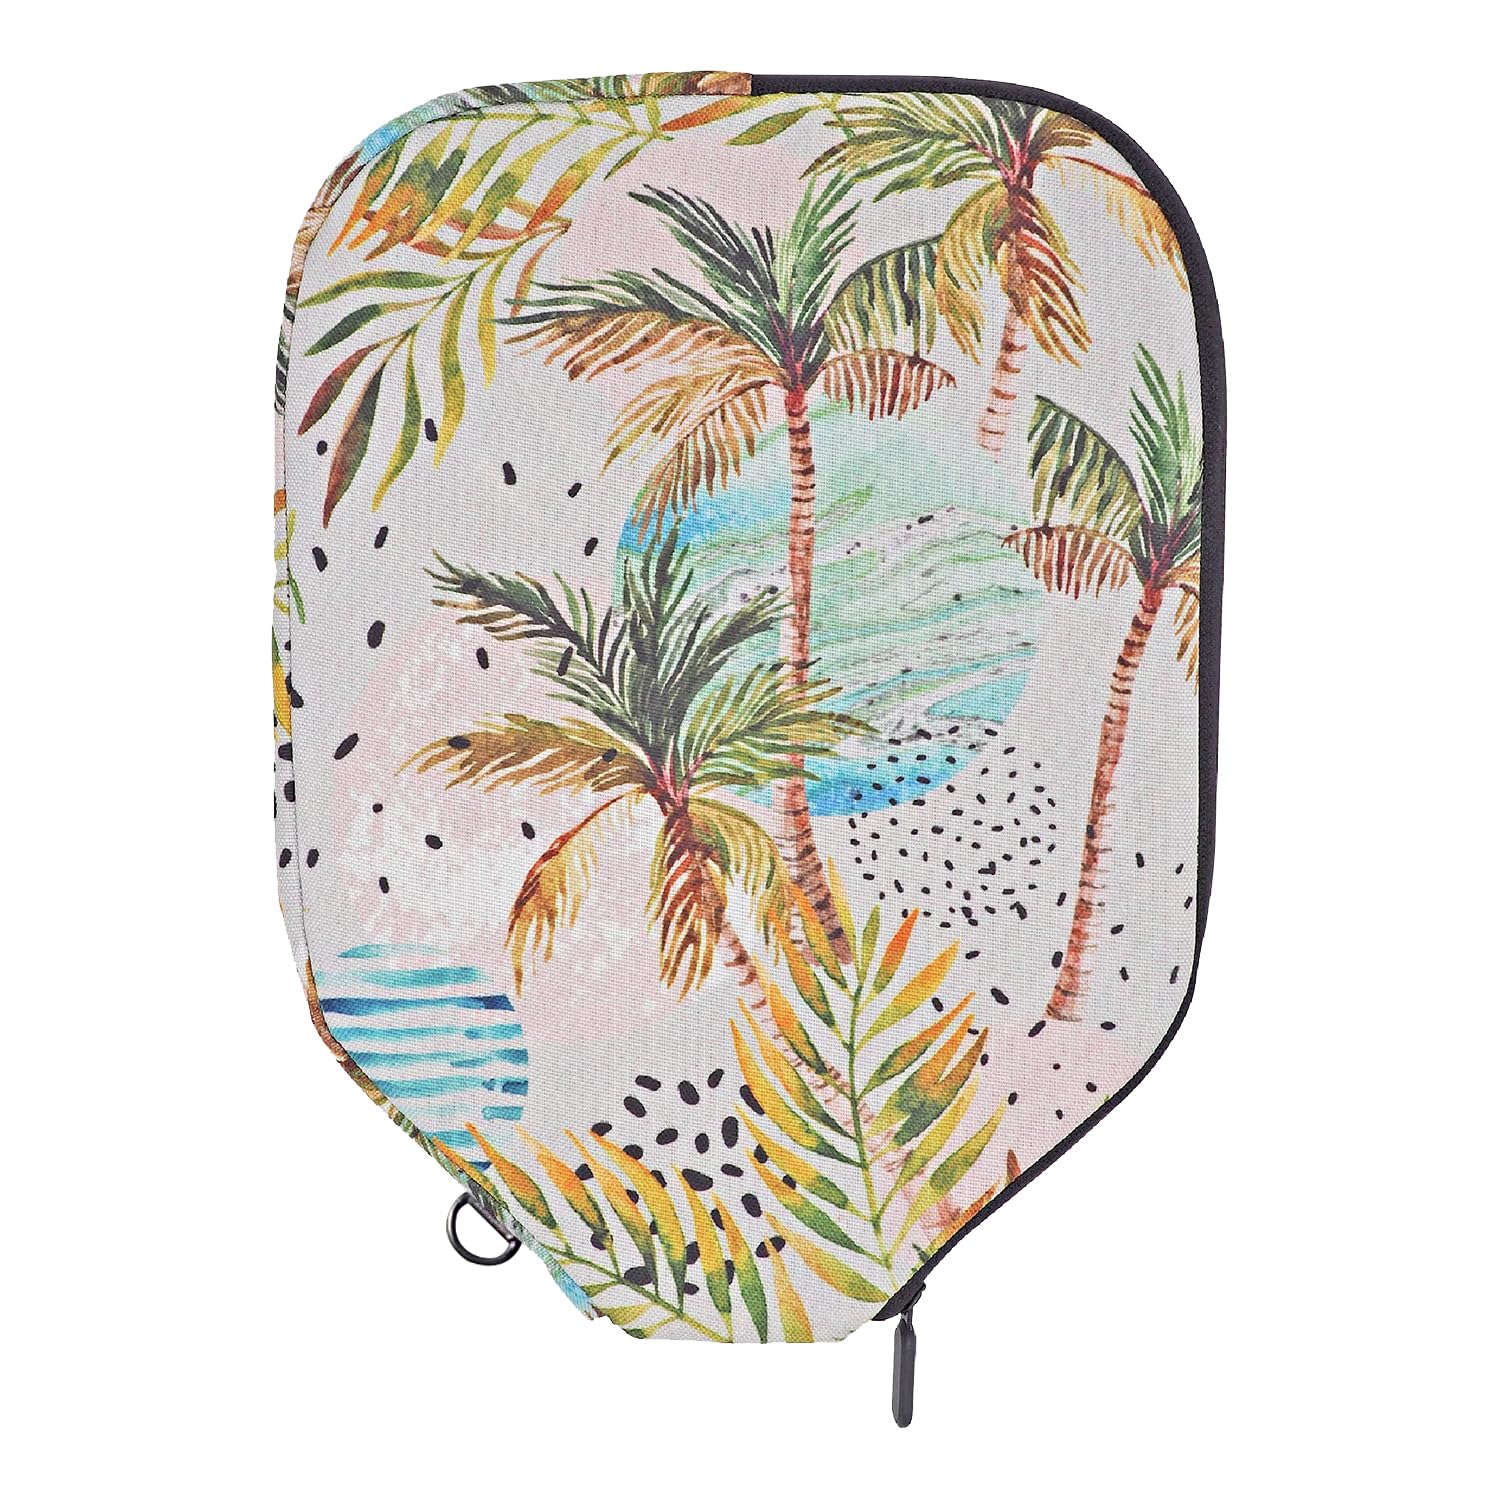 Circled Palms Pickleball Paddle Cover - Standard - Palms-O-Aces